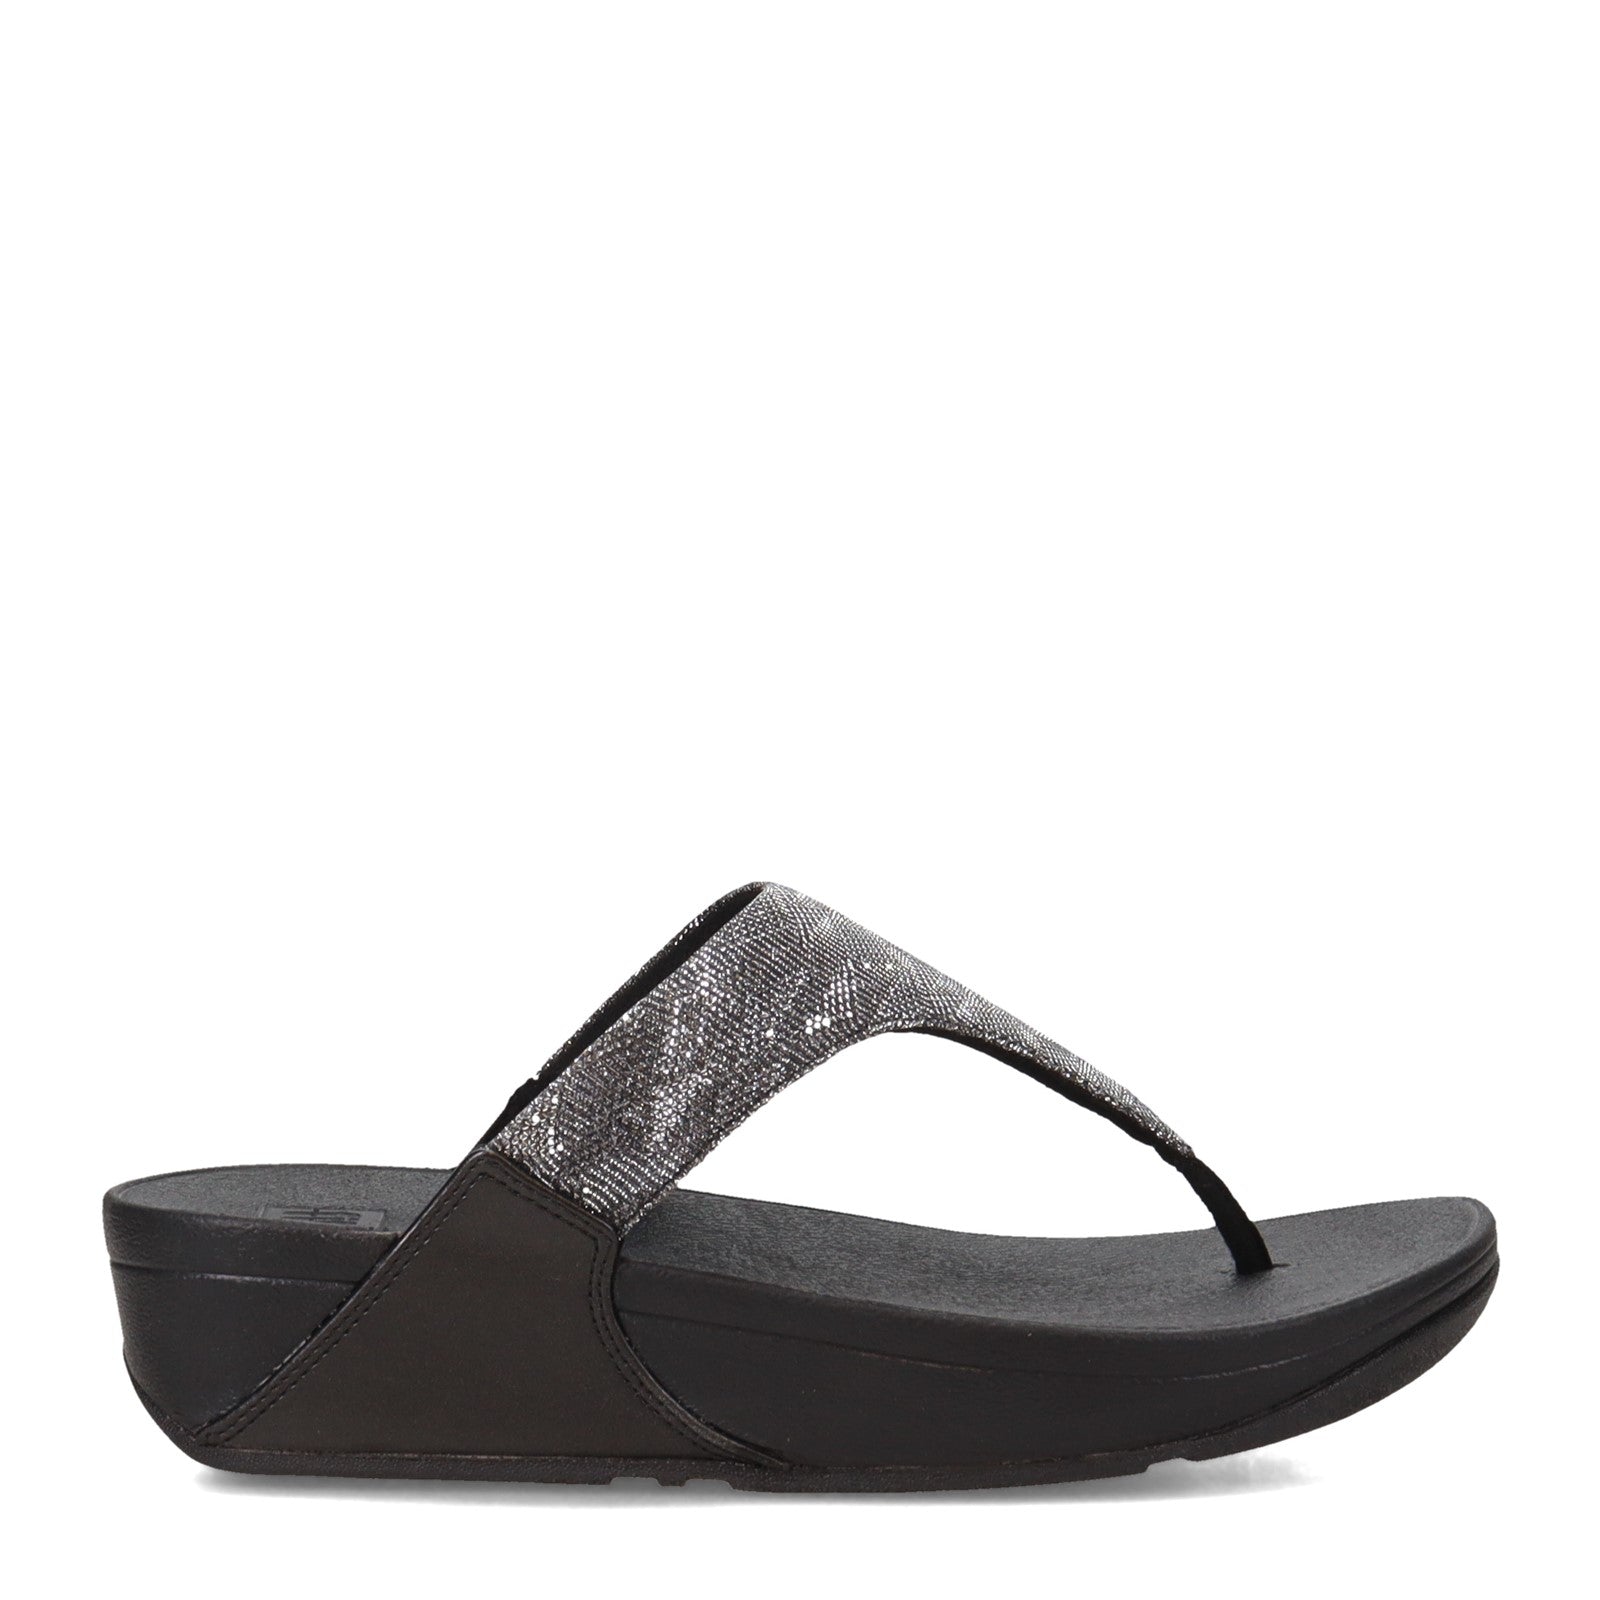 FitFlop Sandals Women's Shoes: Boots, Sneakers, Heels & More - Macy's